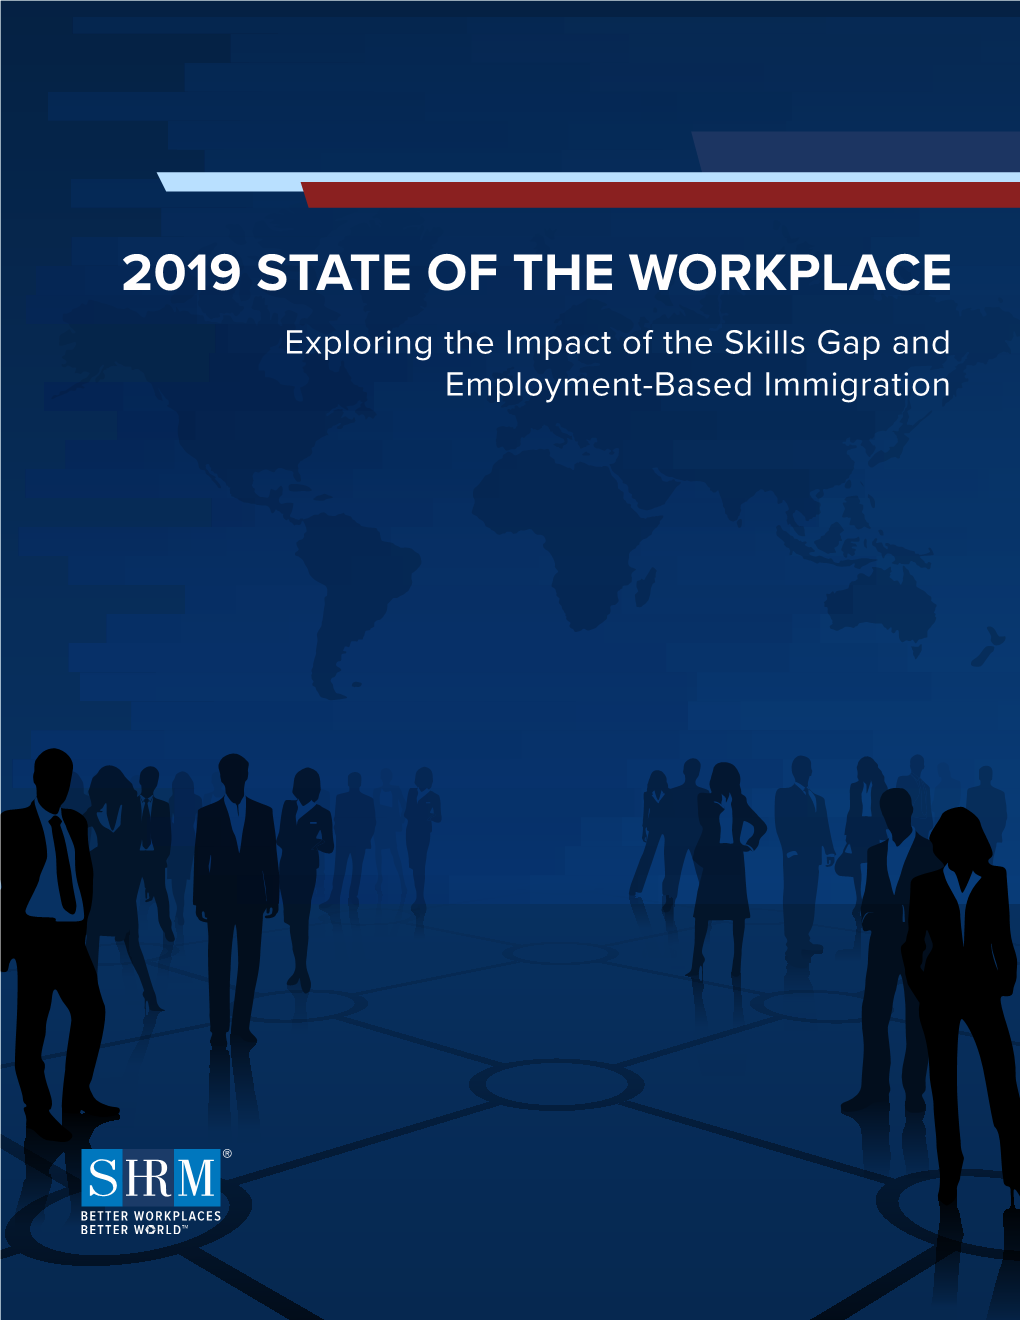 2019 STATE of the WORKPLACE Exploring the Impact of the Skills Gap and Employment-Based Immigration INTRODUCTION